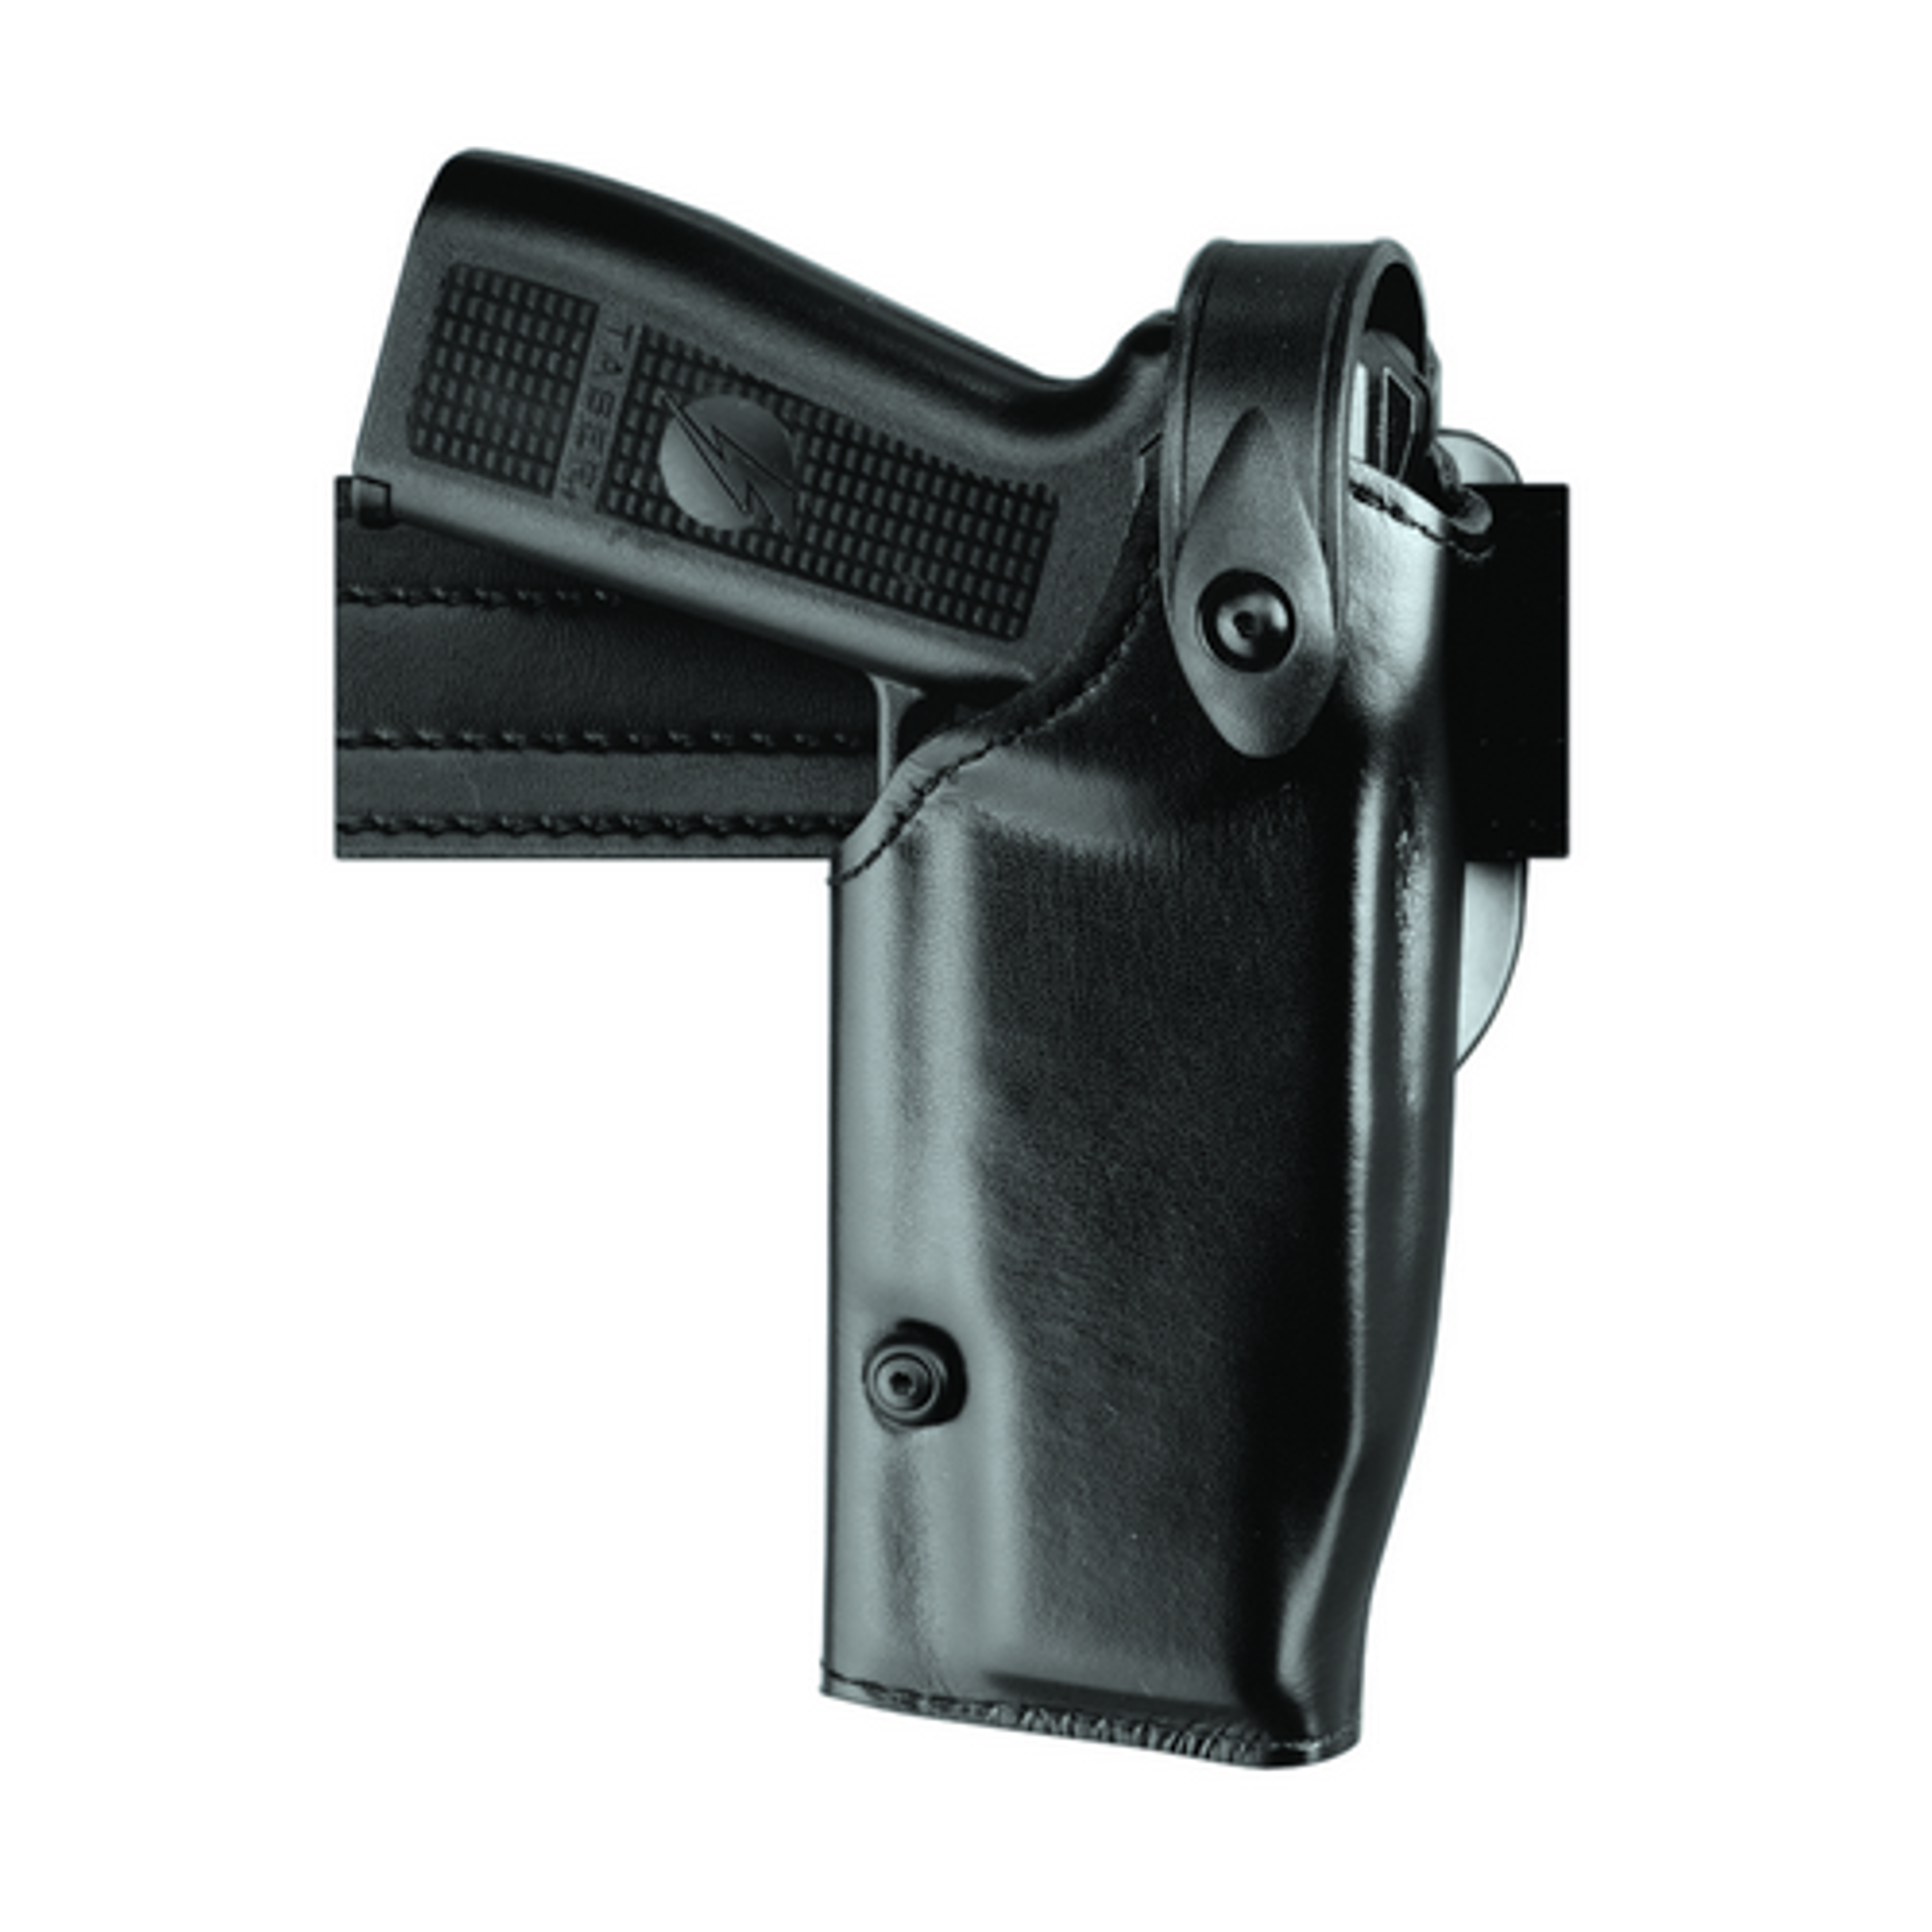 Model 6280 Sls Mid-ride Level Ii Retention Duty Holster For Smith & Wesson M&p 9 - KR6280-219-492